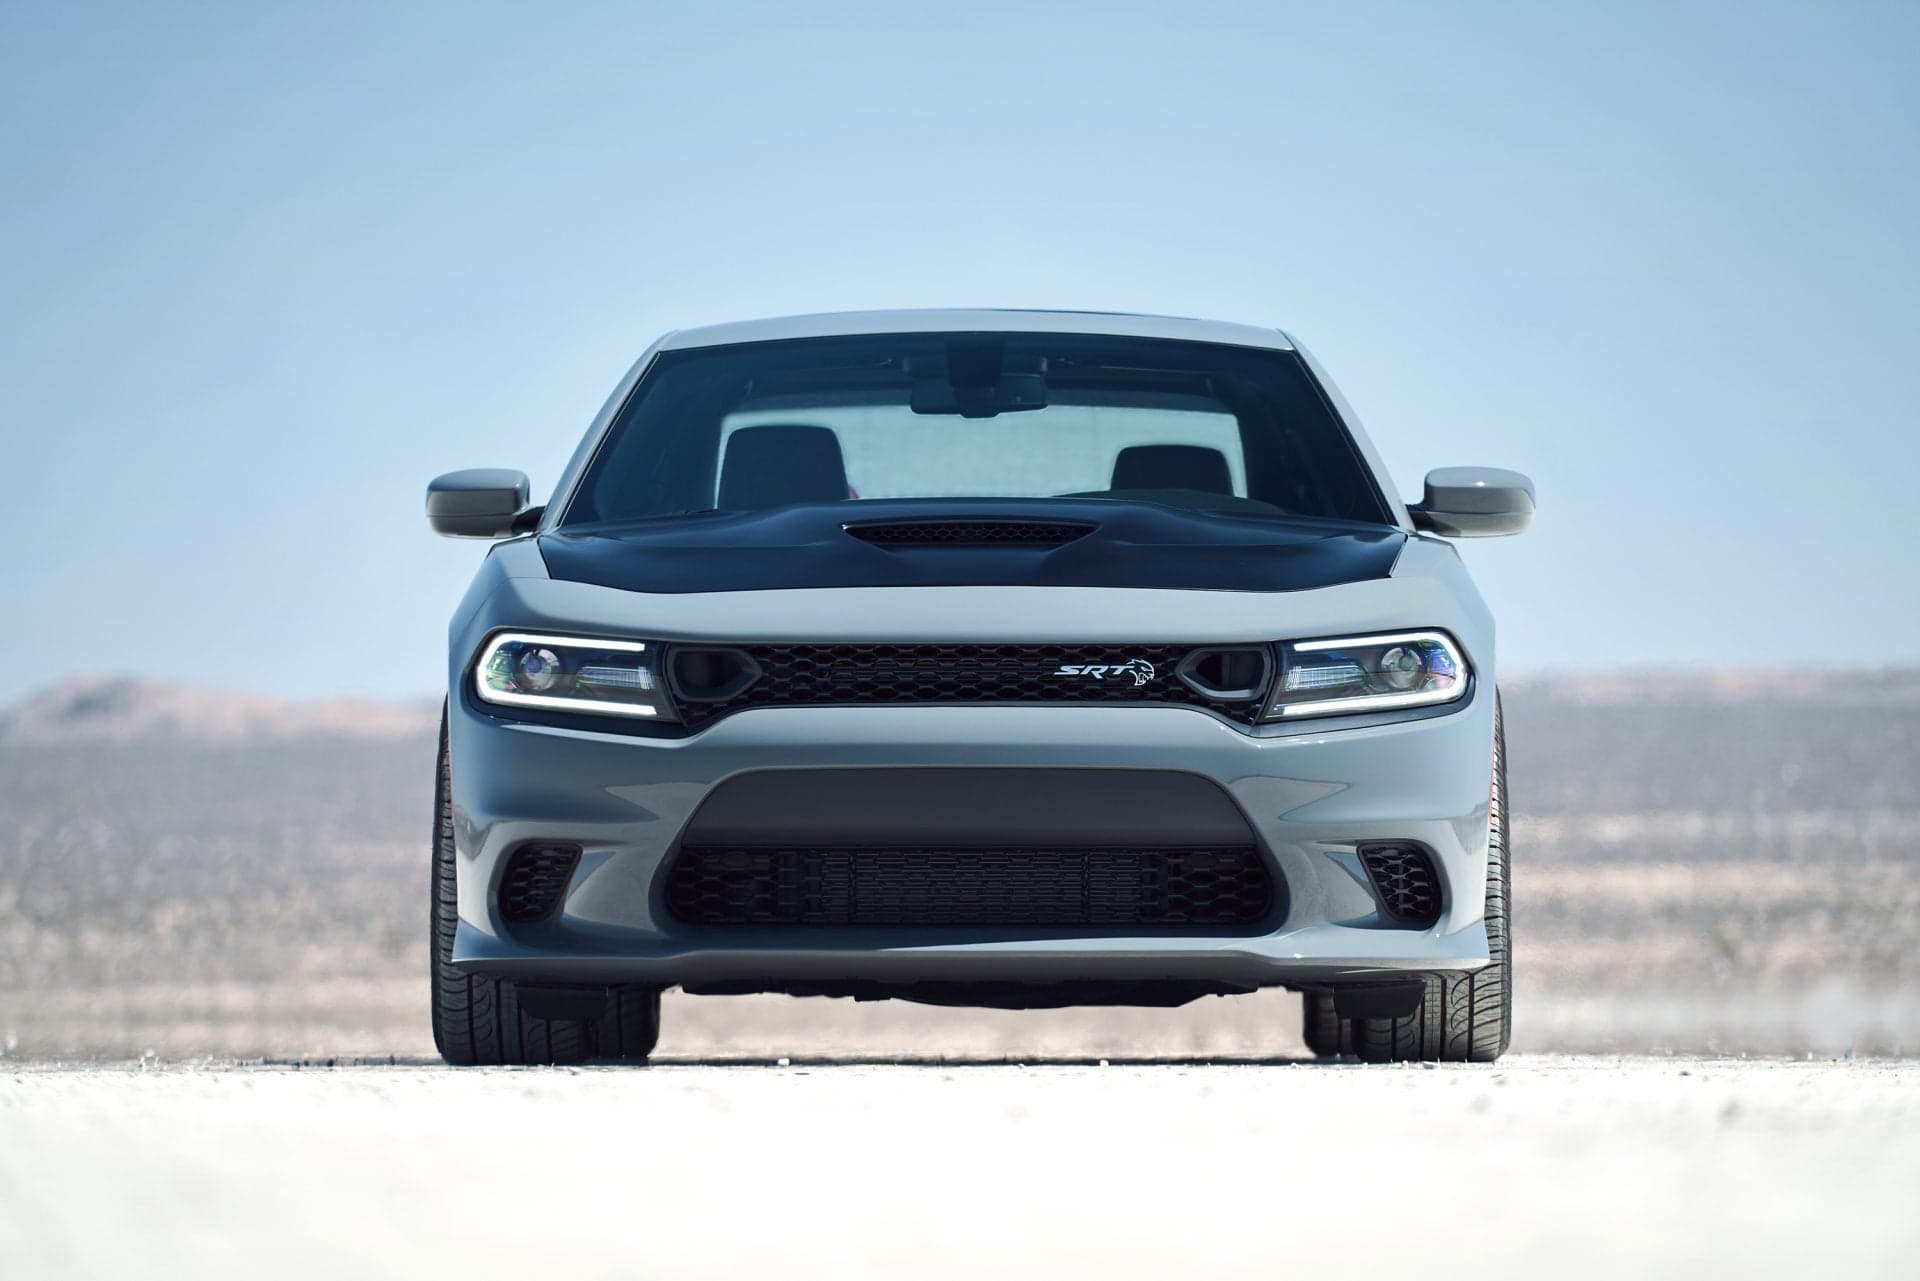 2019 Dodge Charger: Hellcat Returns With Handsome New Get-Up